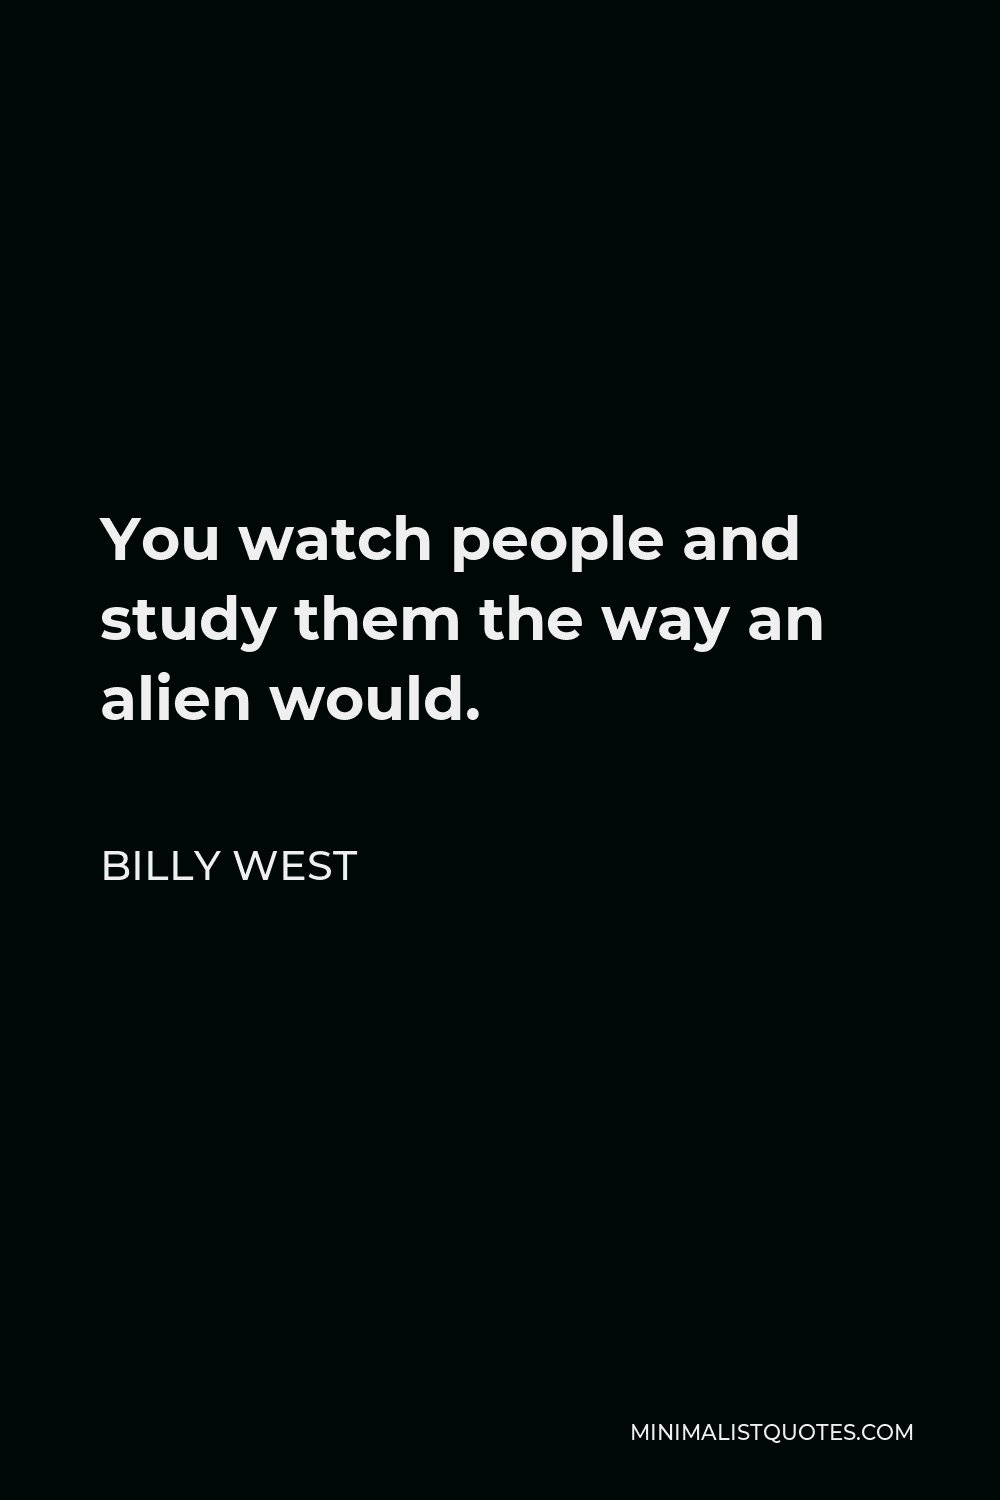 Billy West Quote - You watch people and study them the way an alien would.